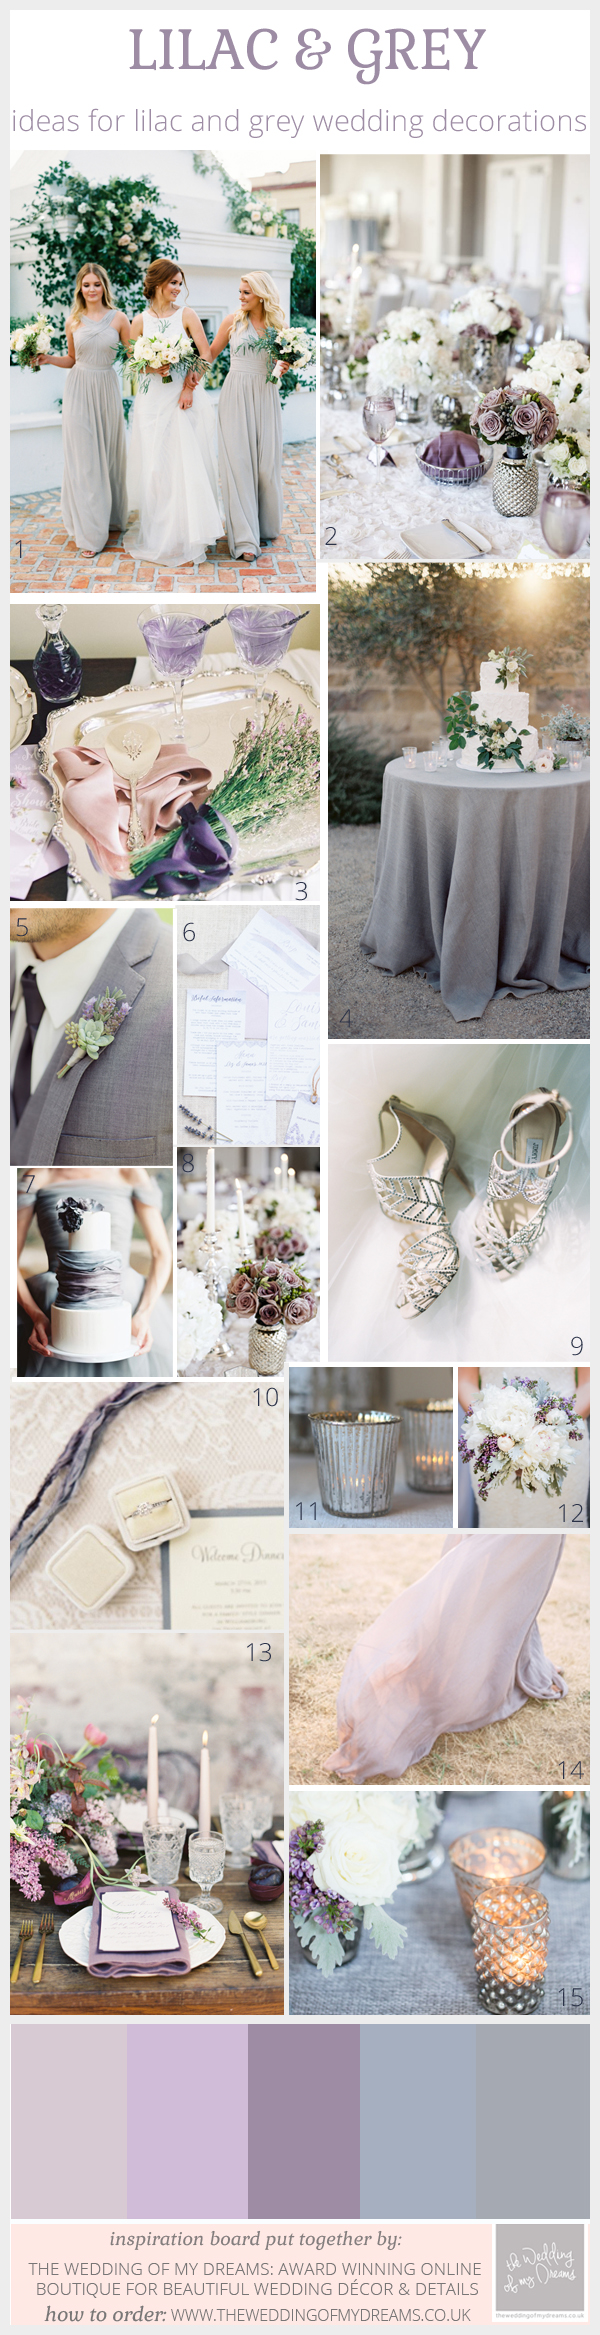 lilac and grey wedding decorations and ideas